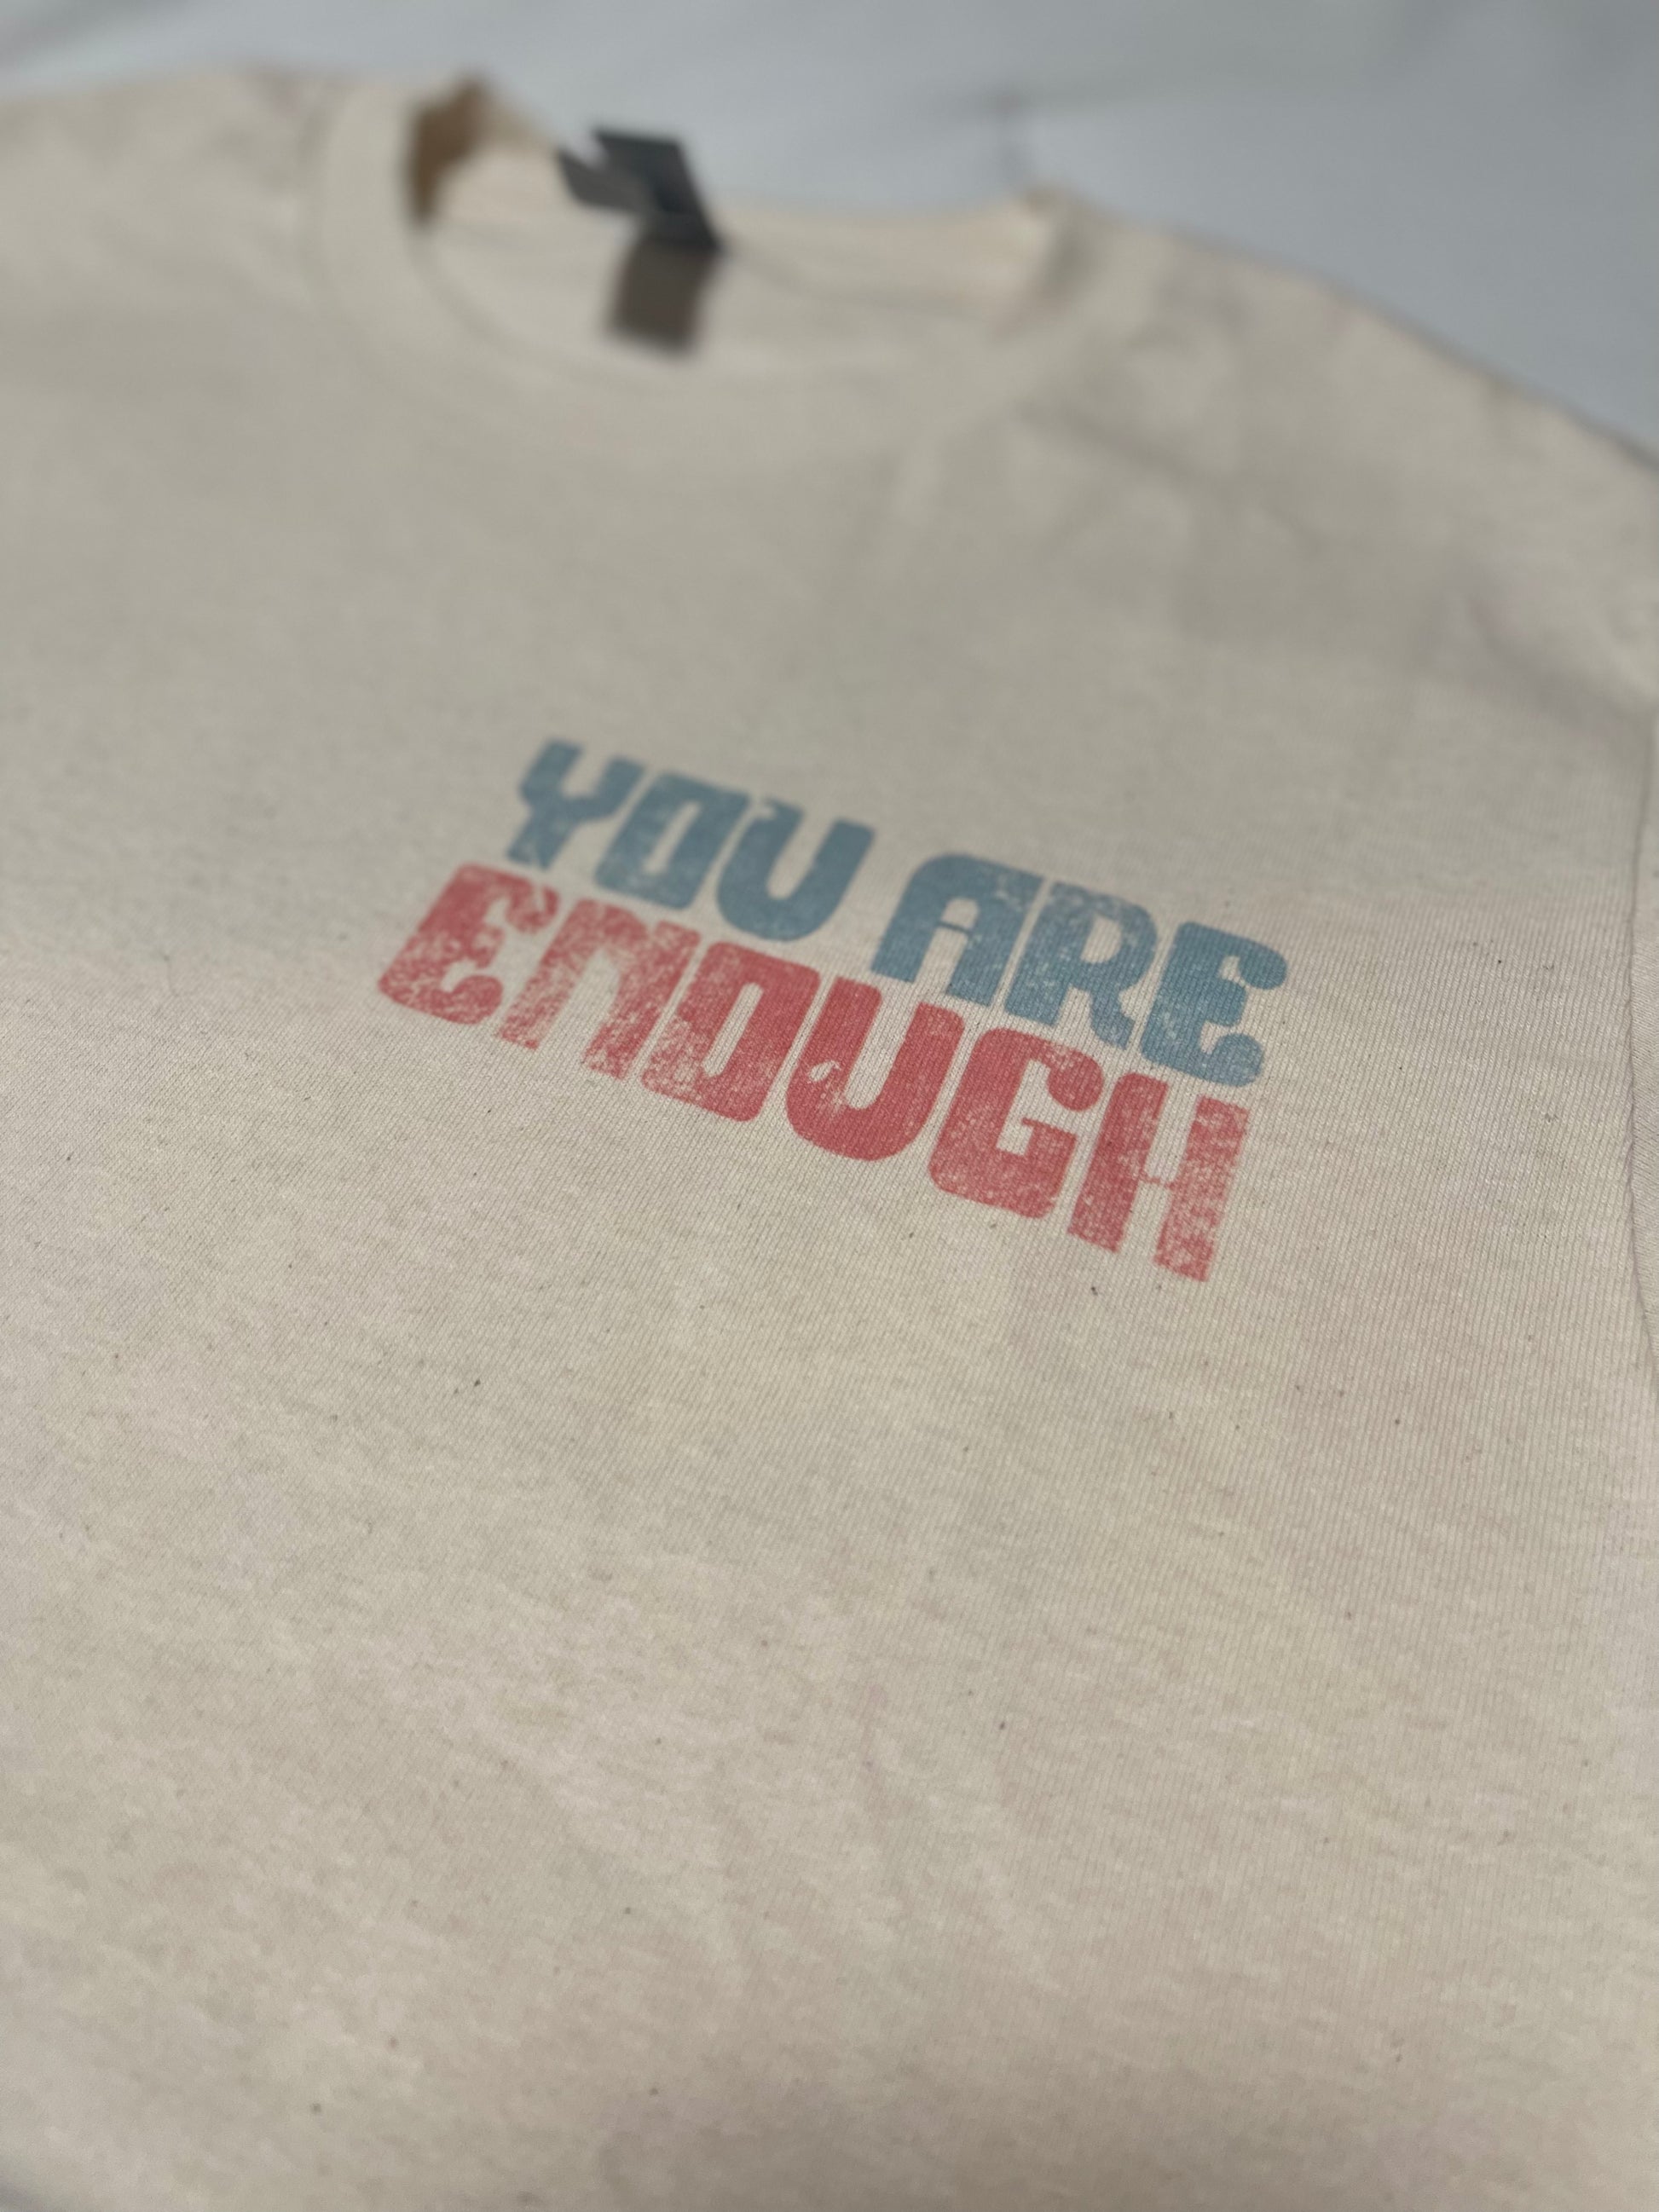 Comfortable natural Gildan T-shirt with empowering text ‘You Are Enough’ – a daily reminder of self-worth and confidence.